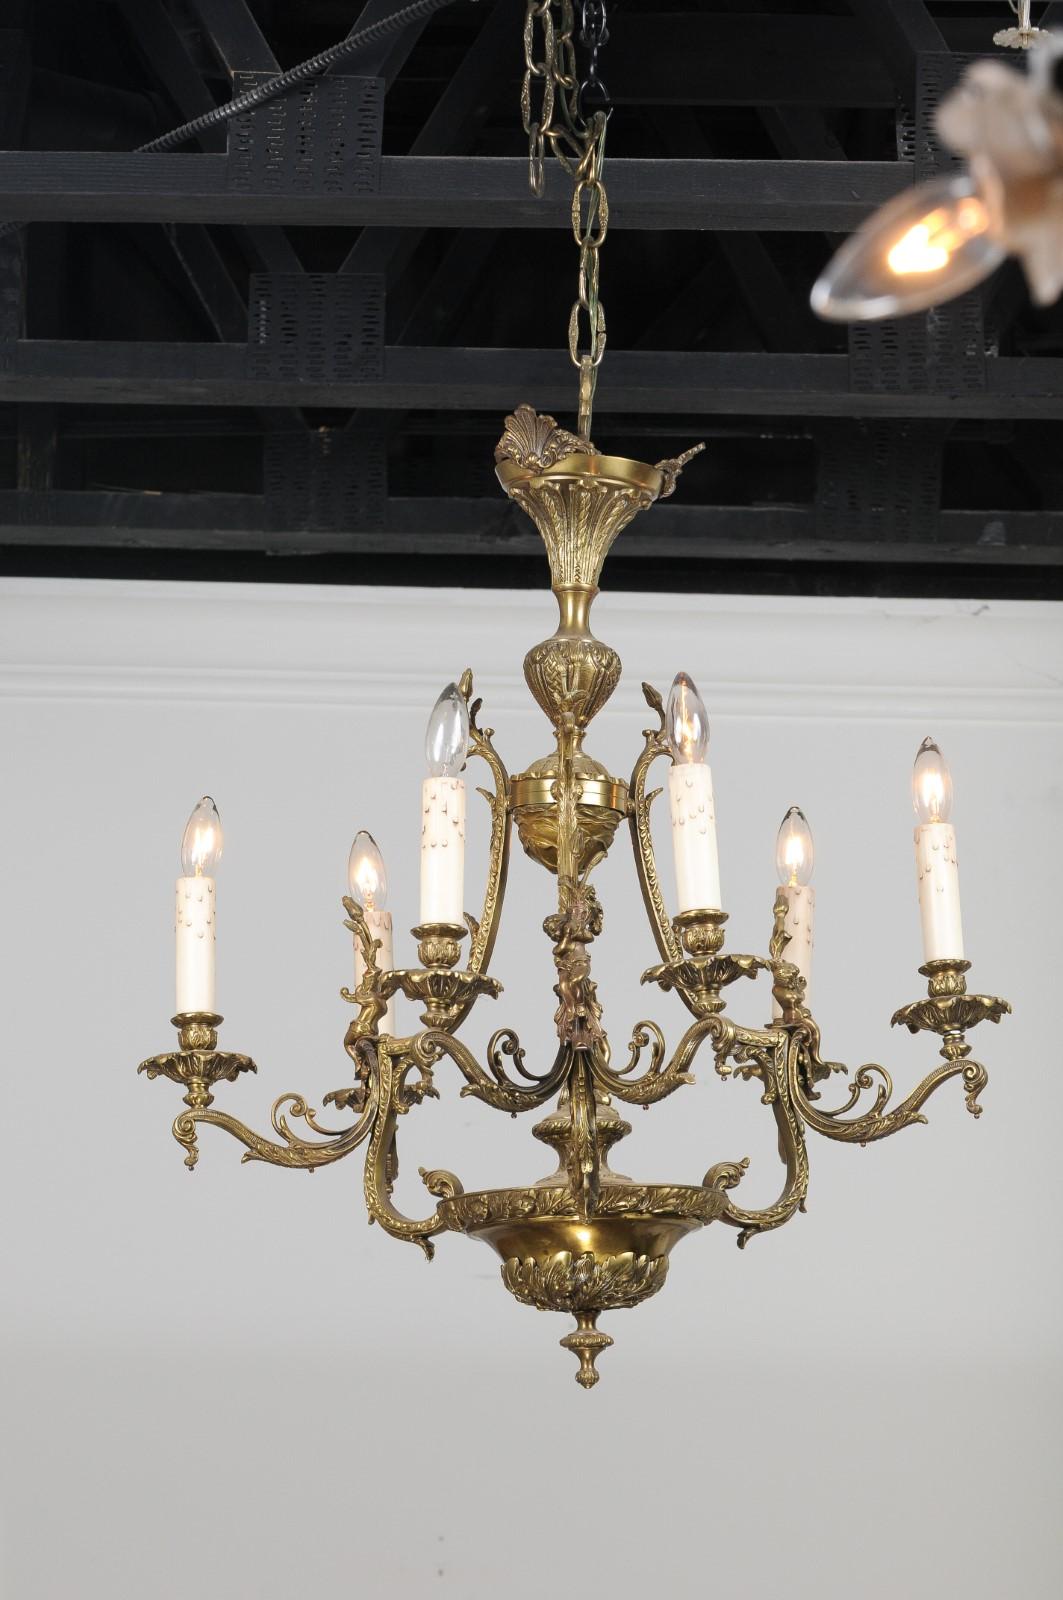 Spanish 19th Century Bronze Six-Light Chandelier with Cherubs and Floral Decor For Sale 6